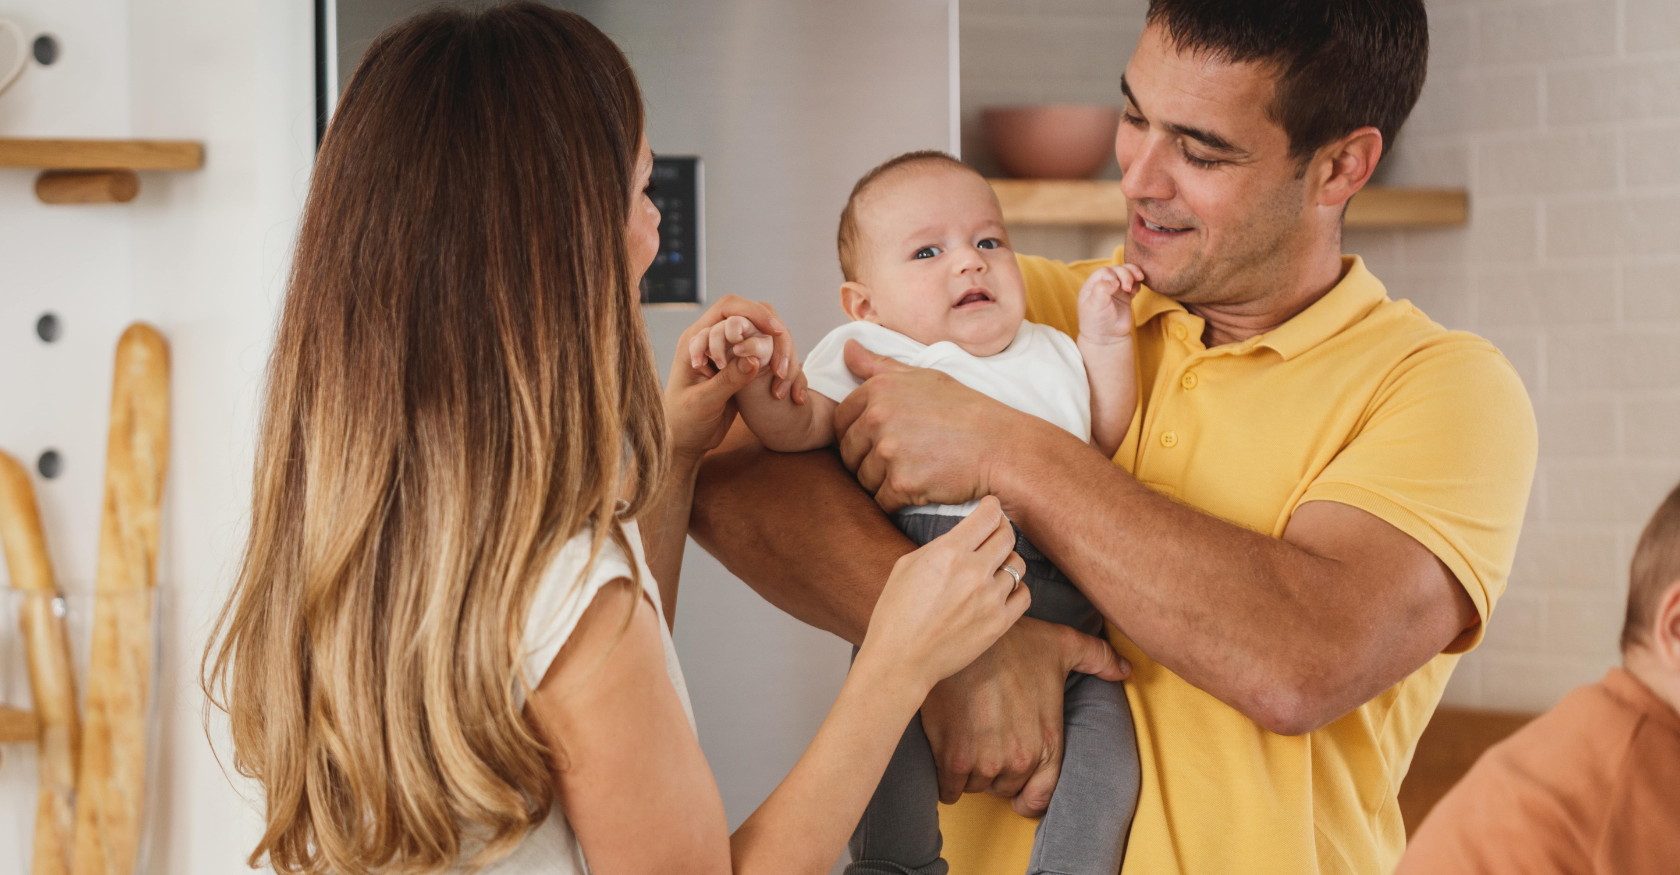 A man and woman are holding a baby in their arms in a kitchen.